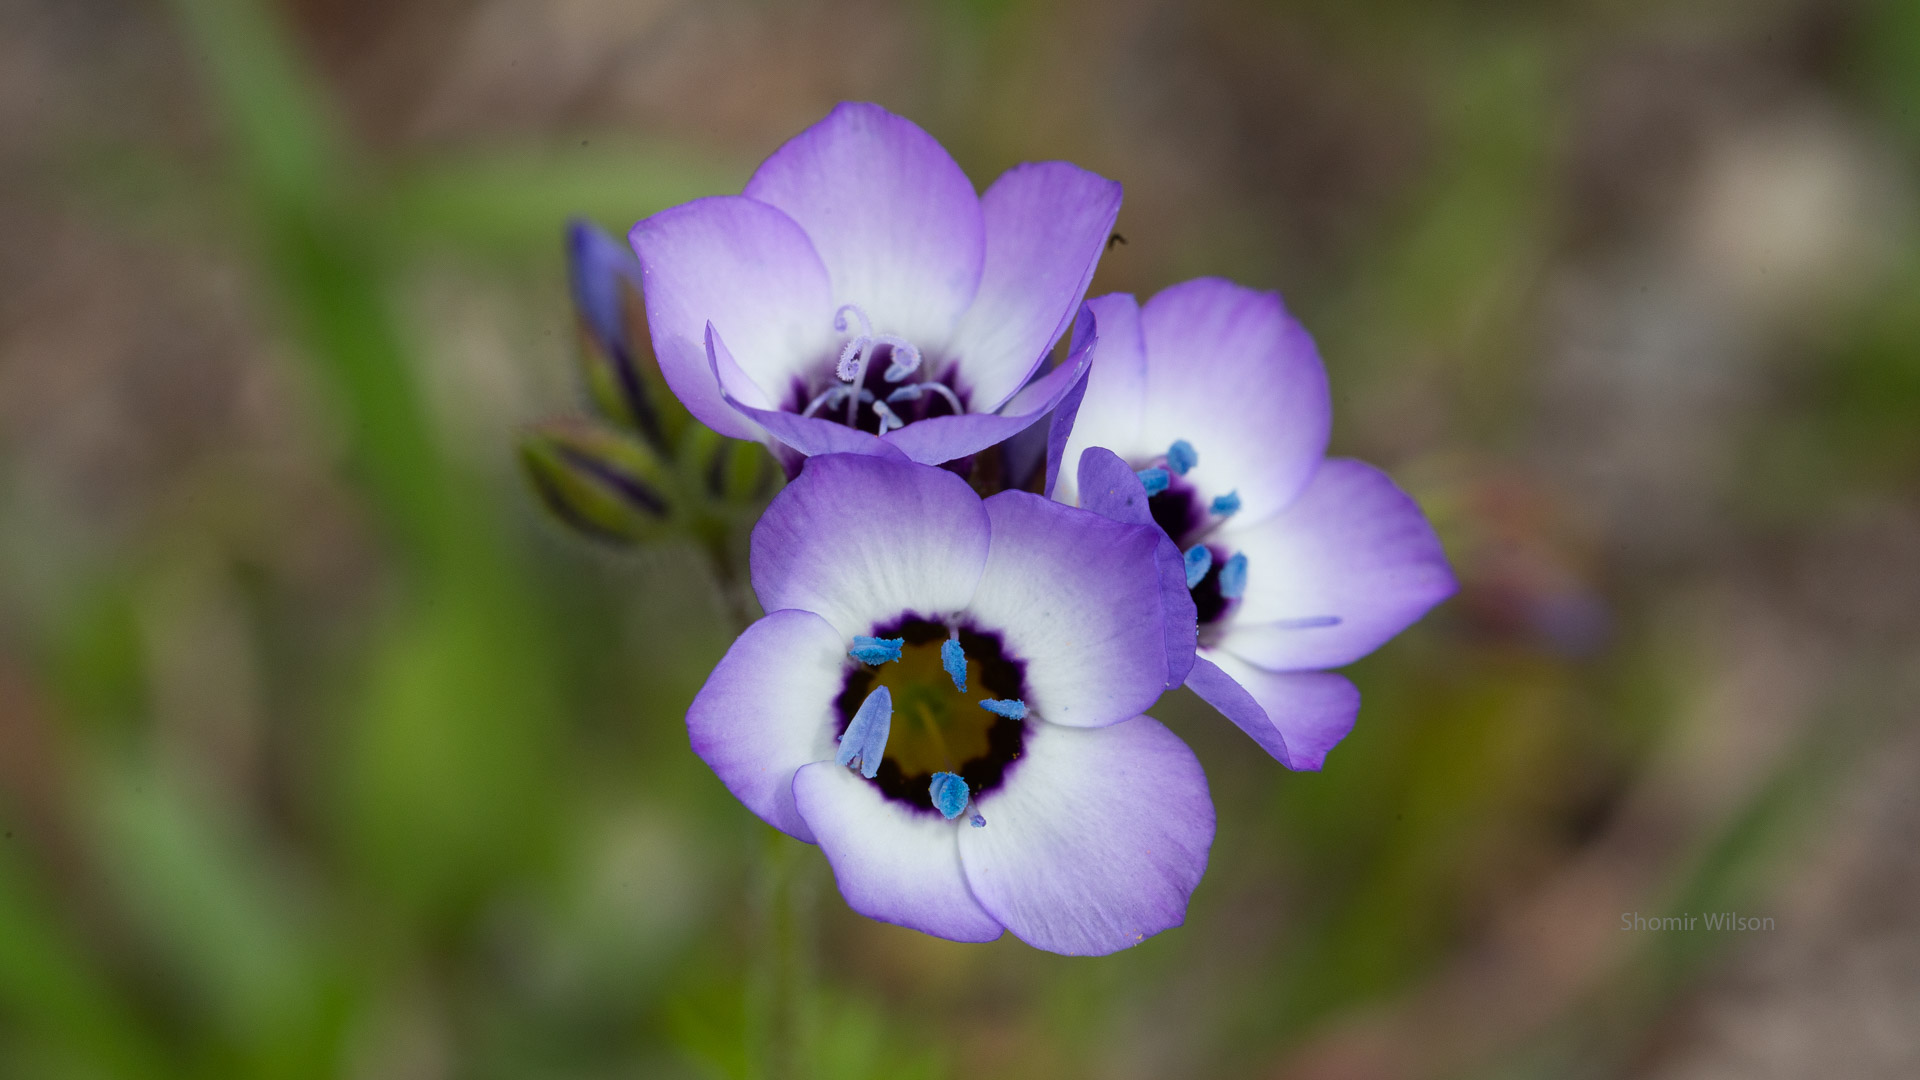 Three small bright purple flowers with bright blue anthers